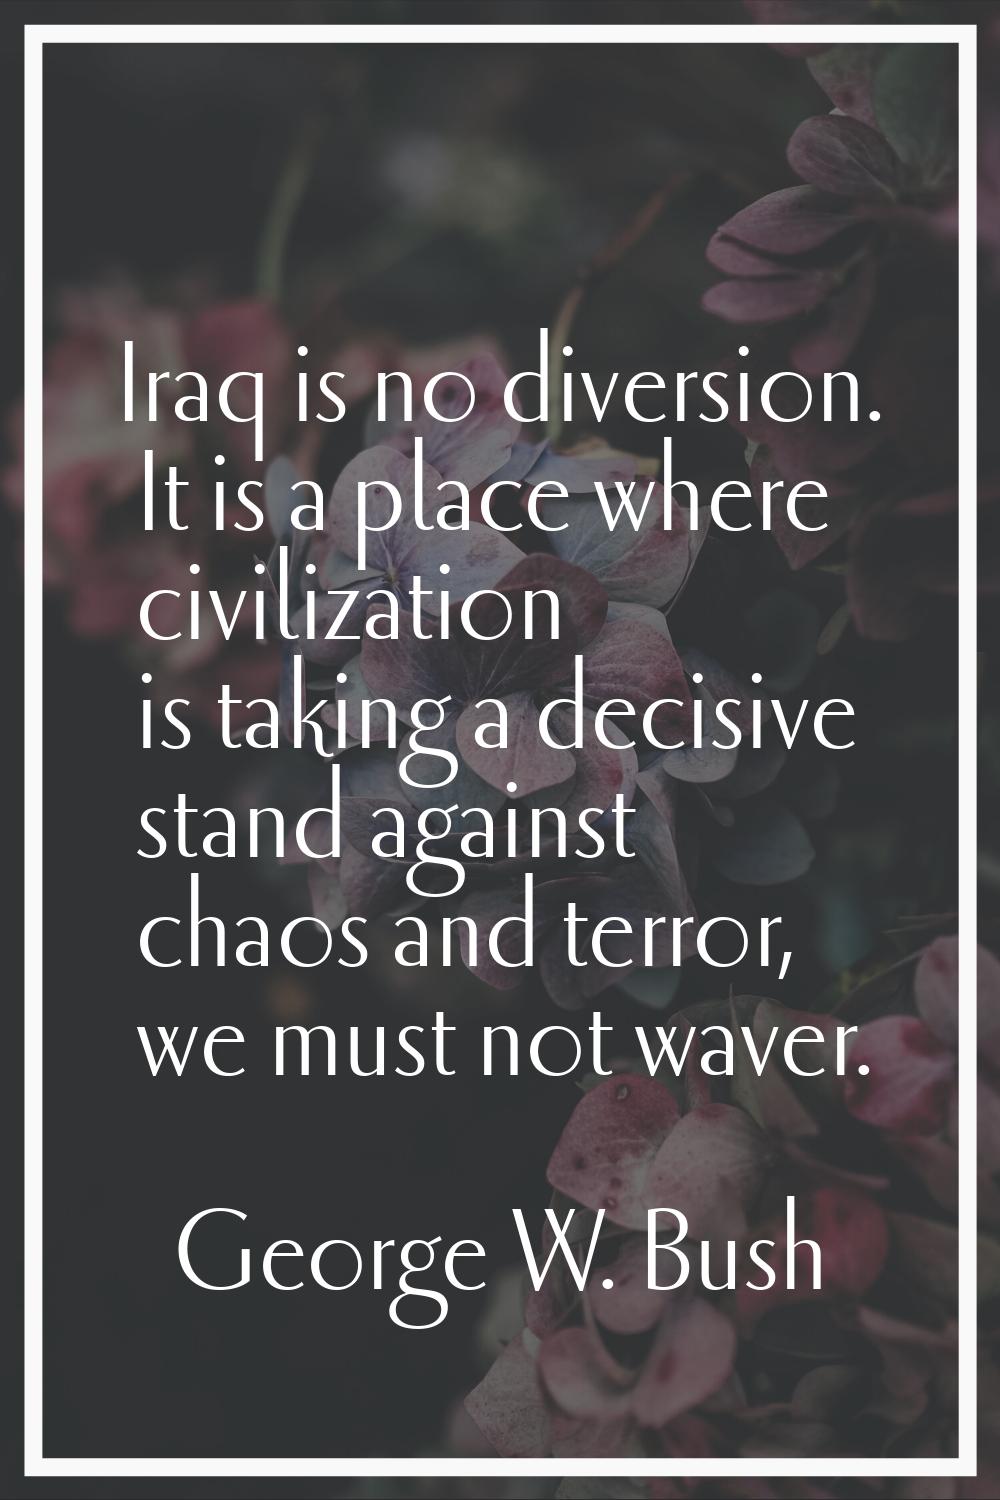 Iraq is no diversion. It is a place where civilization is taking a decisive stand against chaos and